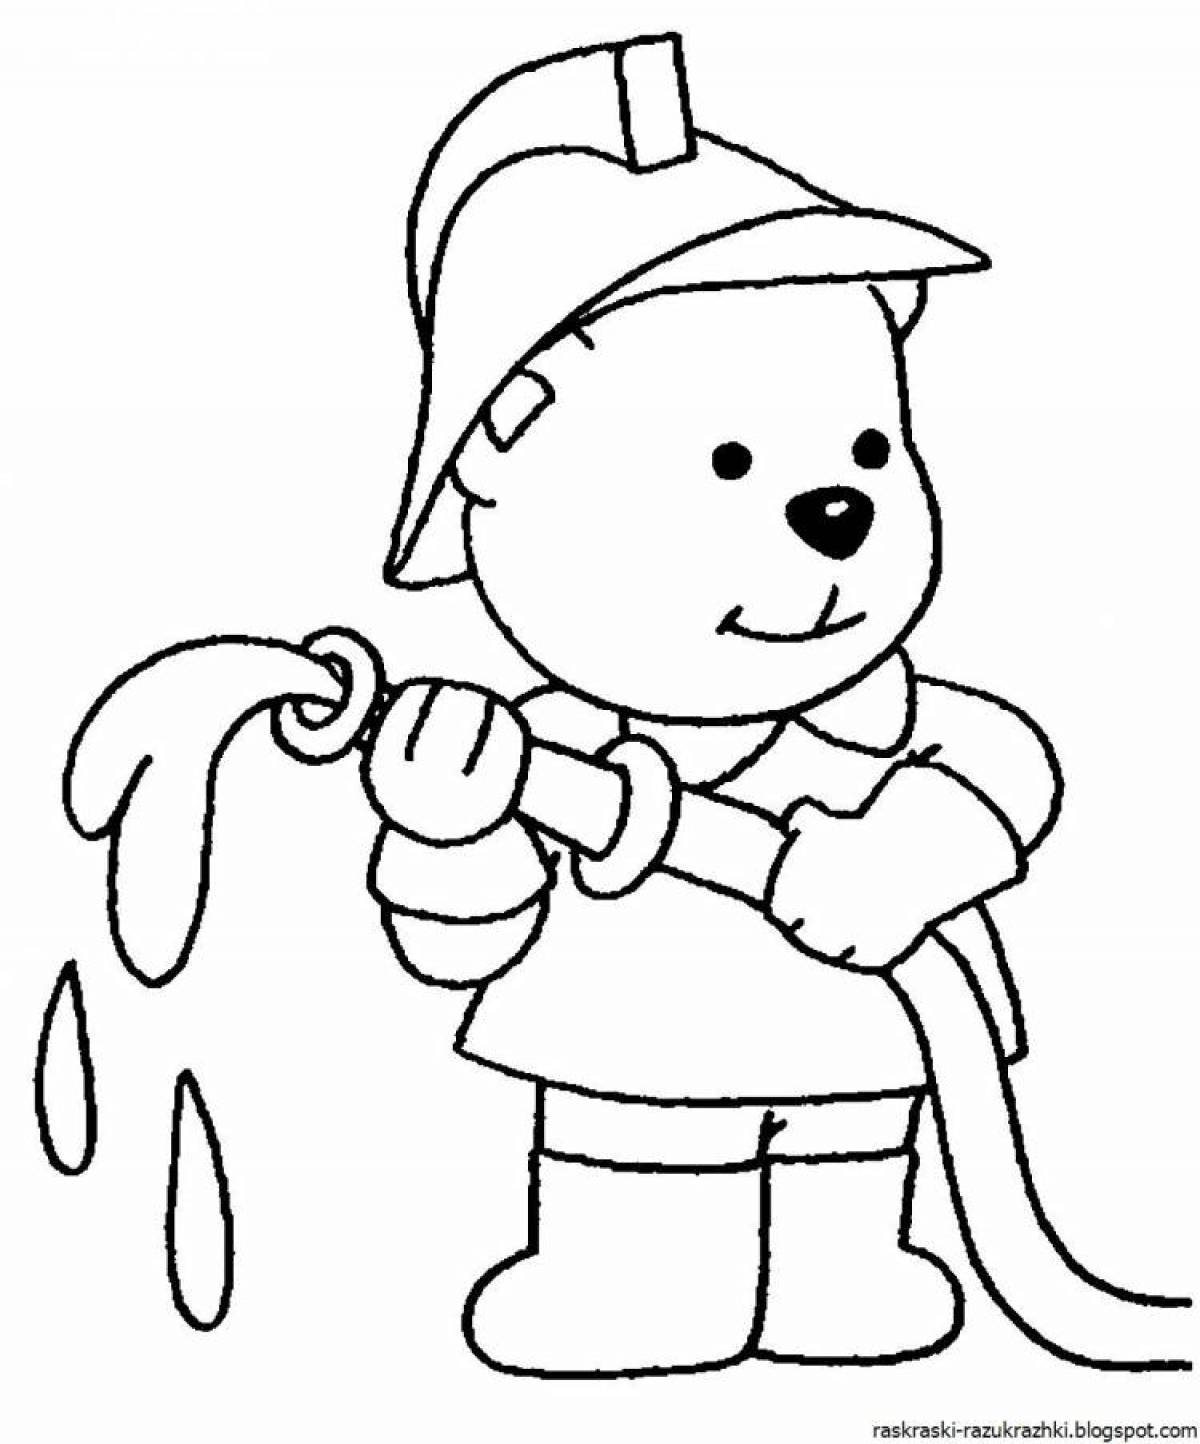 Animated fireman coloring page for kids